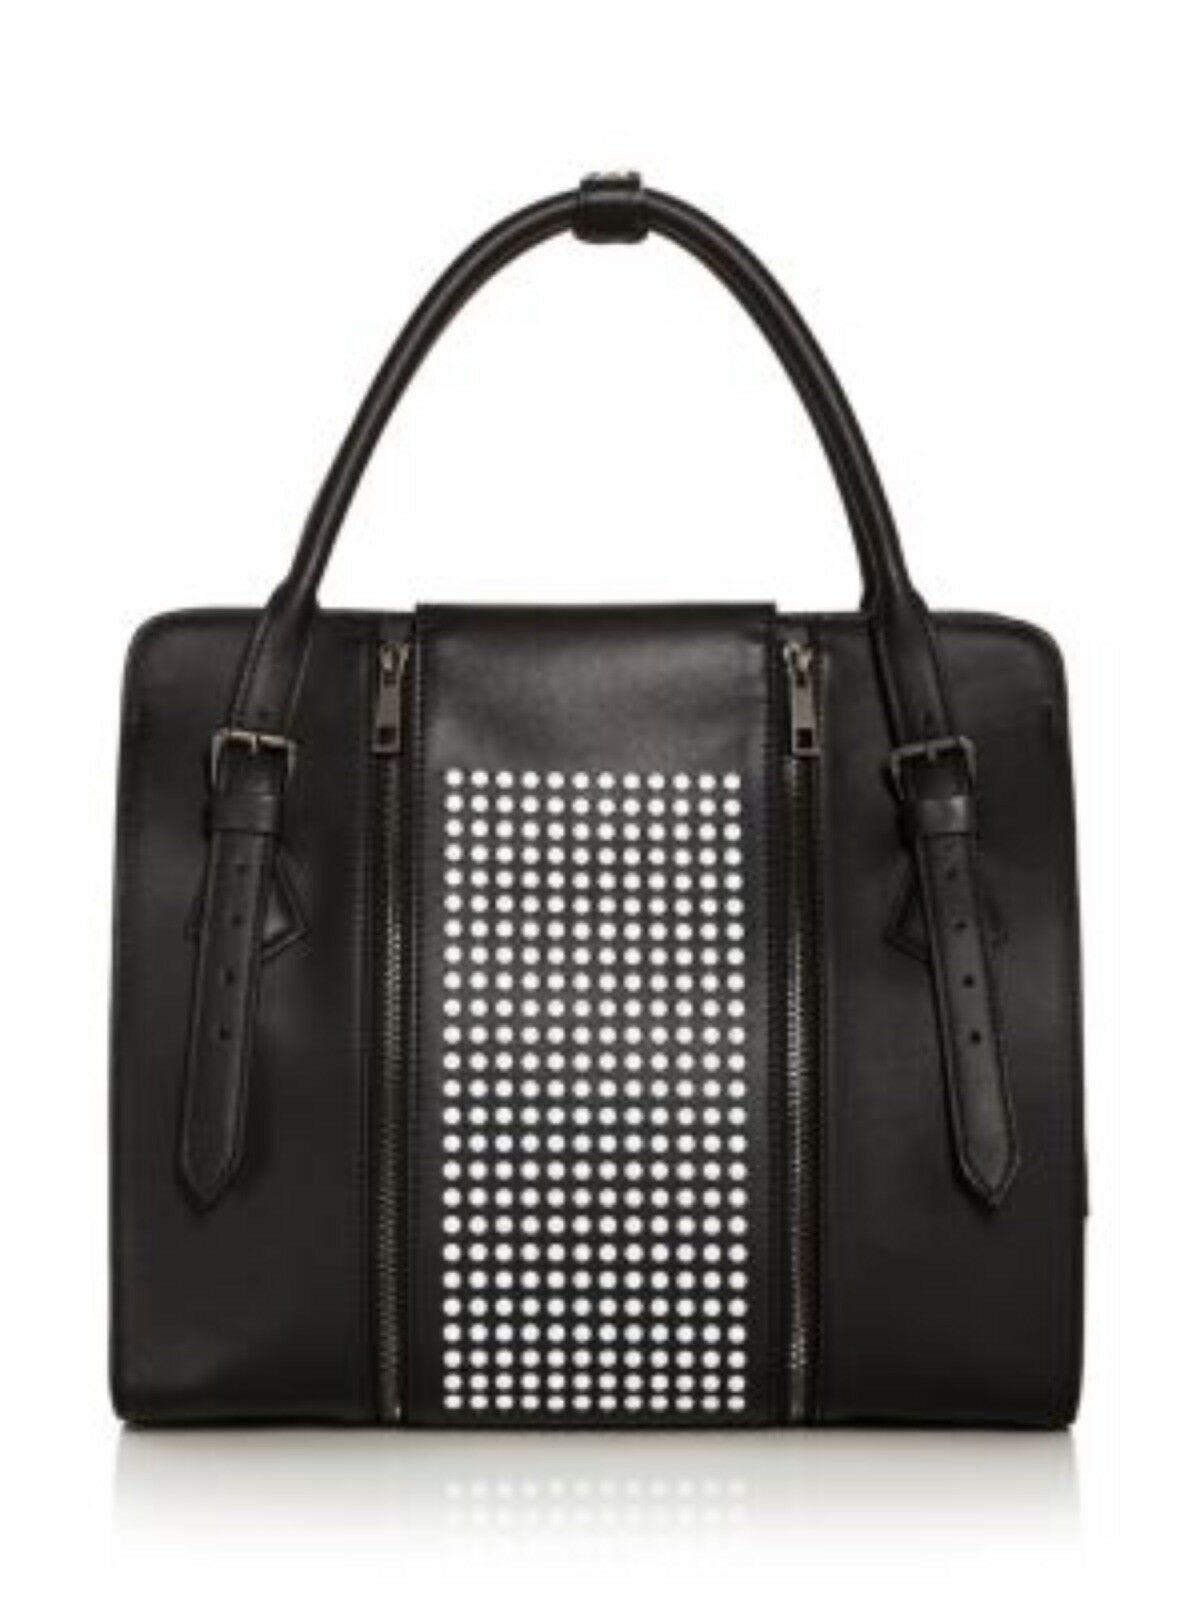 Big Mary Jay Bag $795 - Outlet Designers